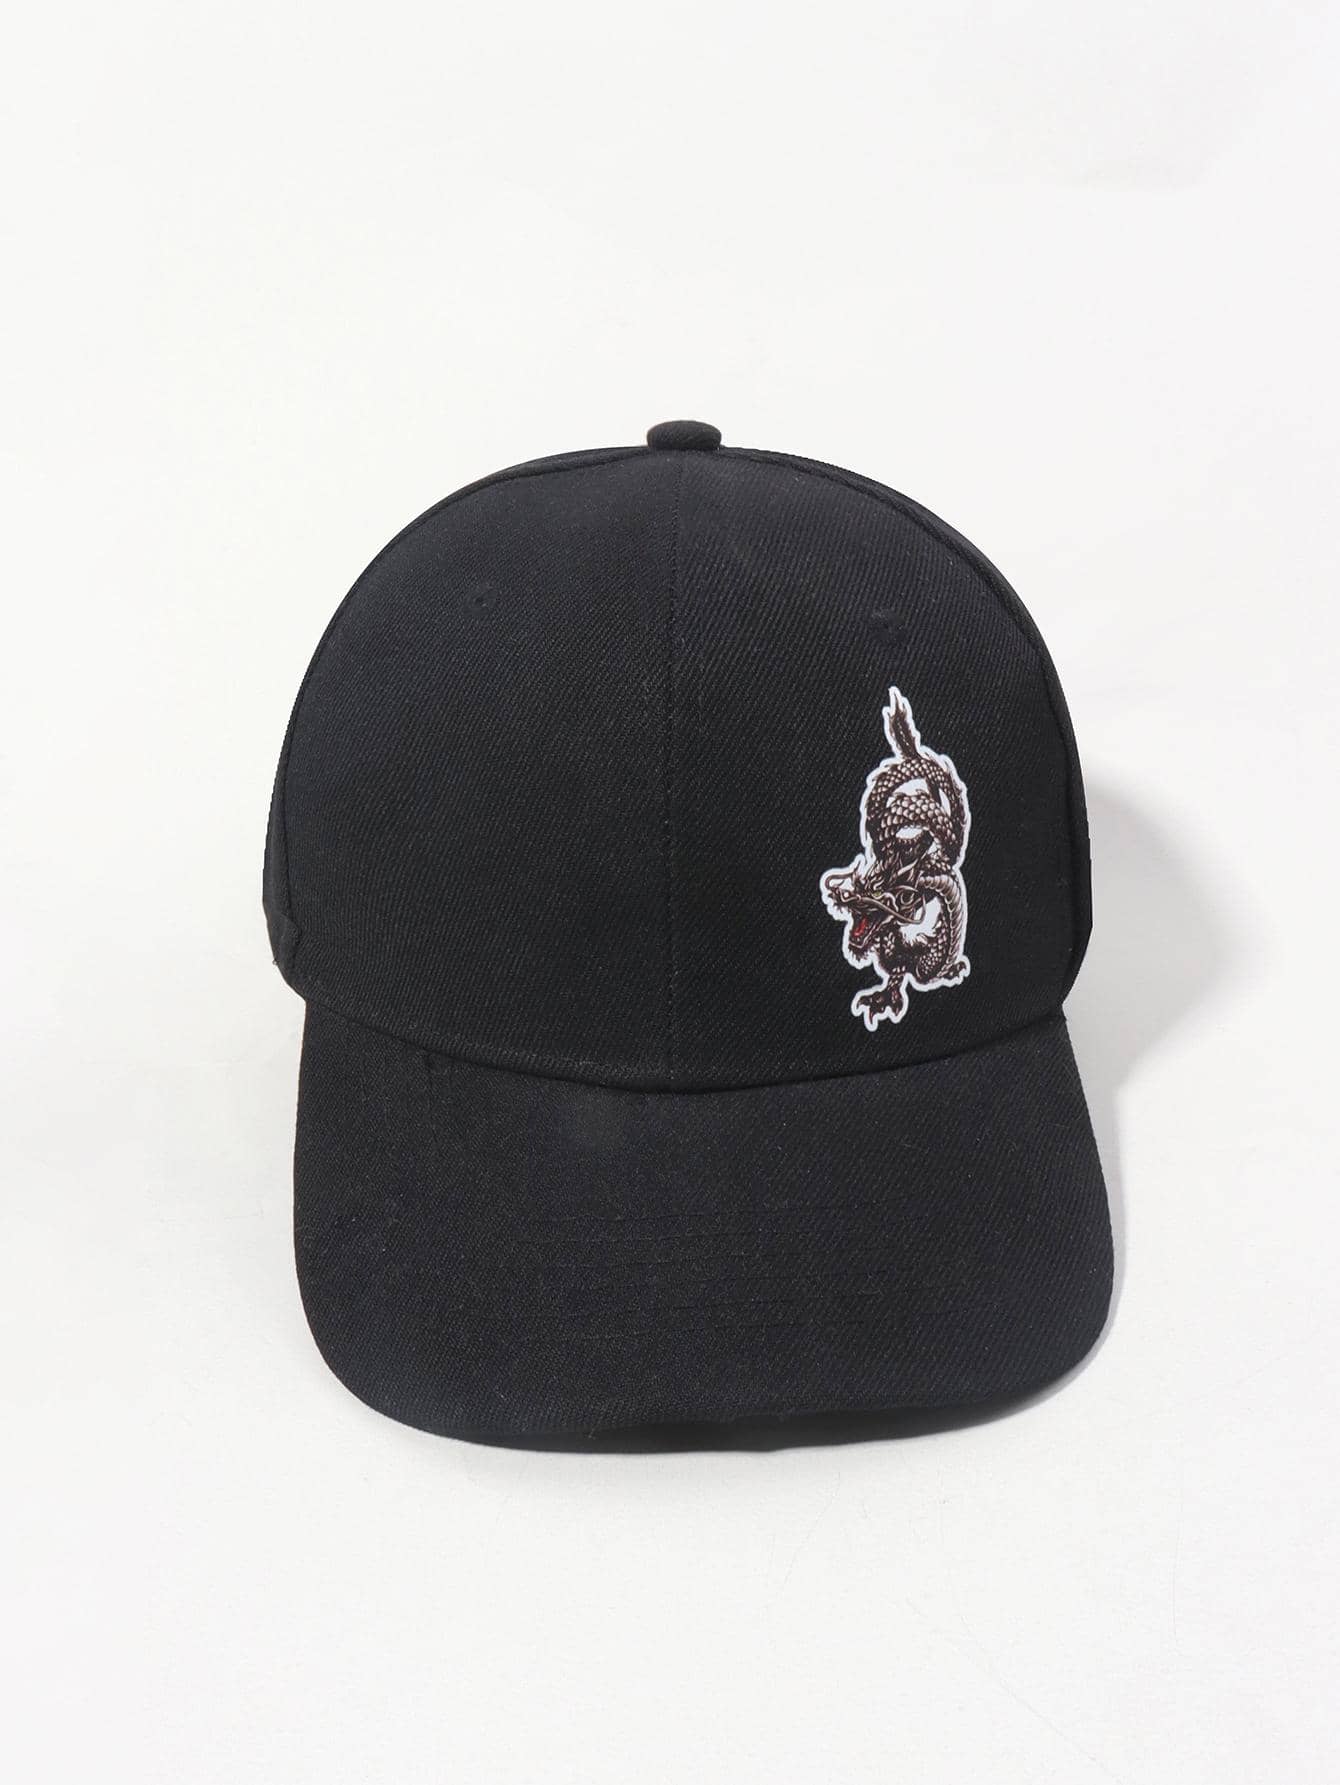 1pc Men Chinese Dragon Pattern Casual Baseball Cap For Daily Life